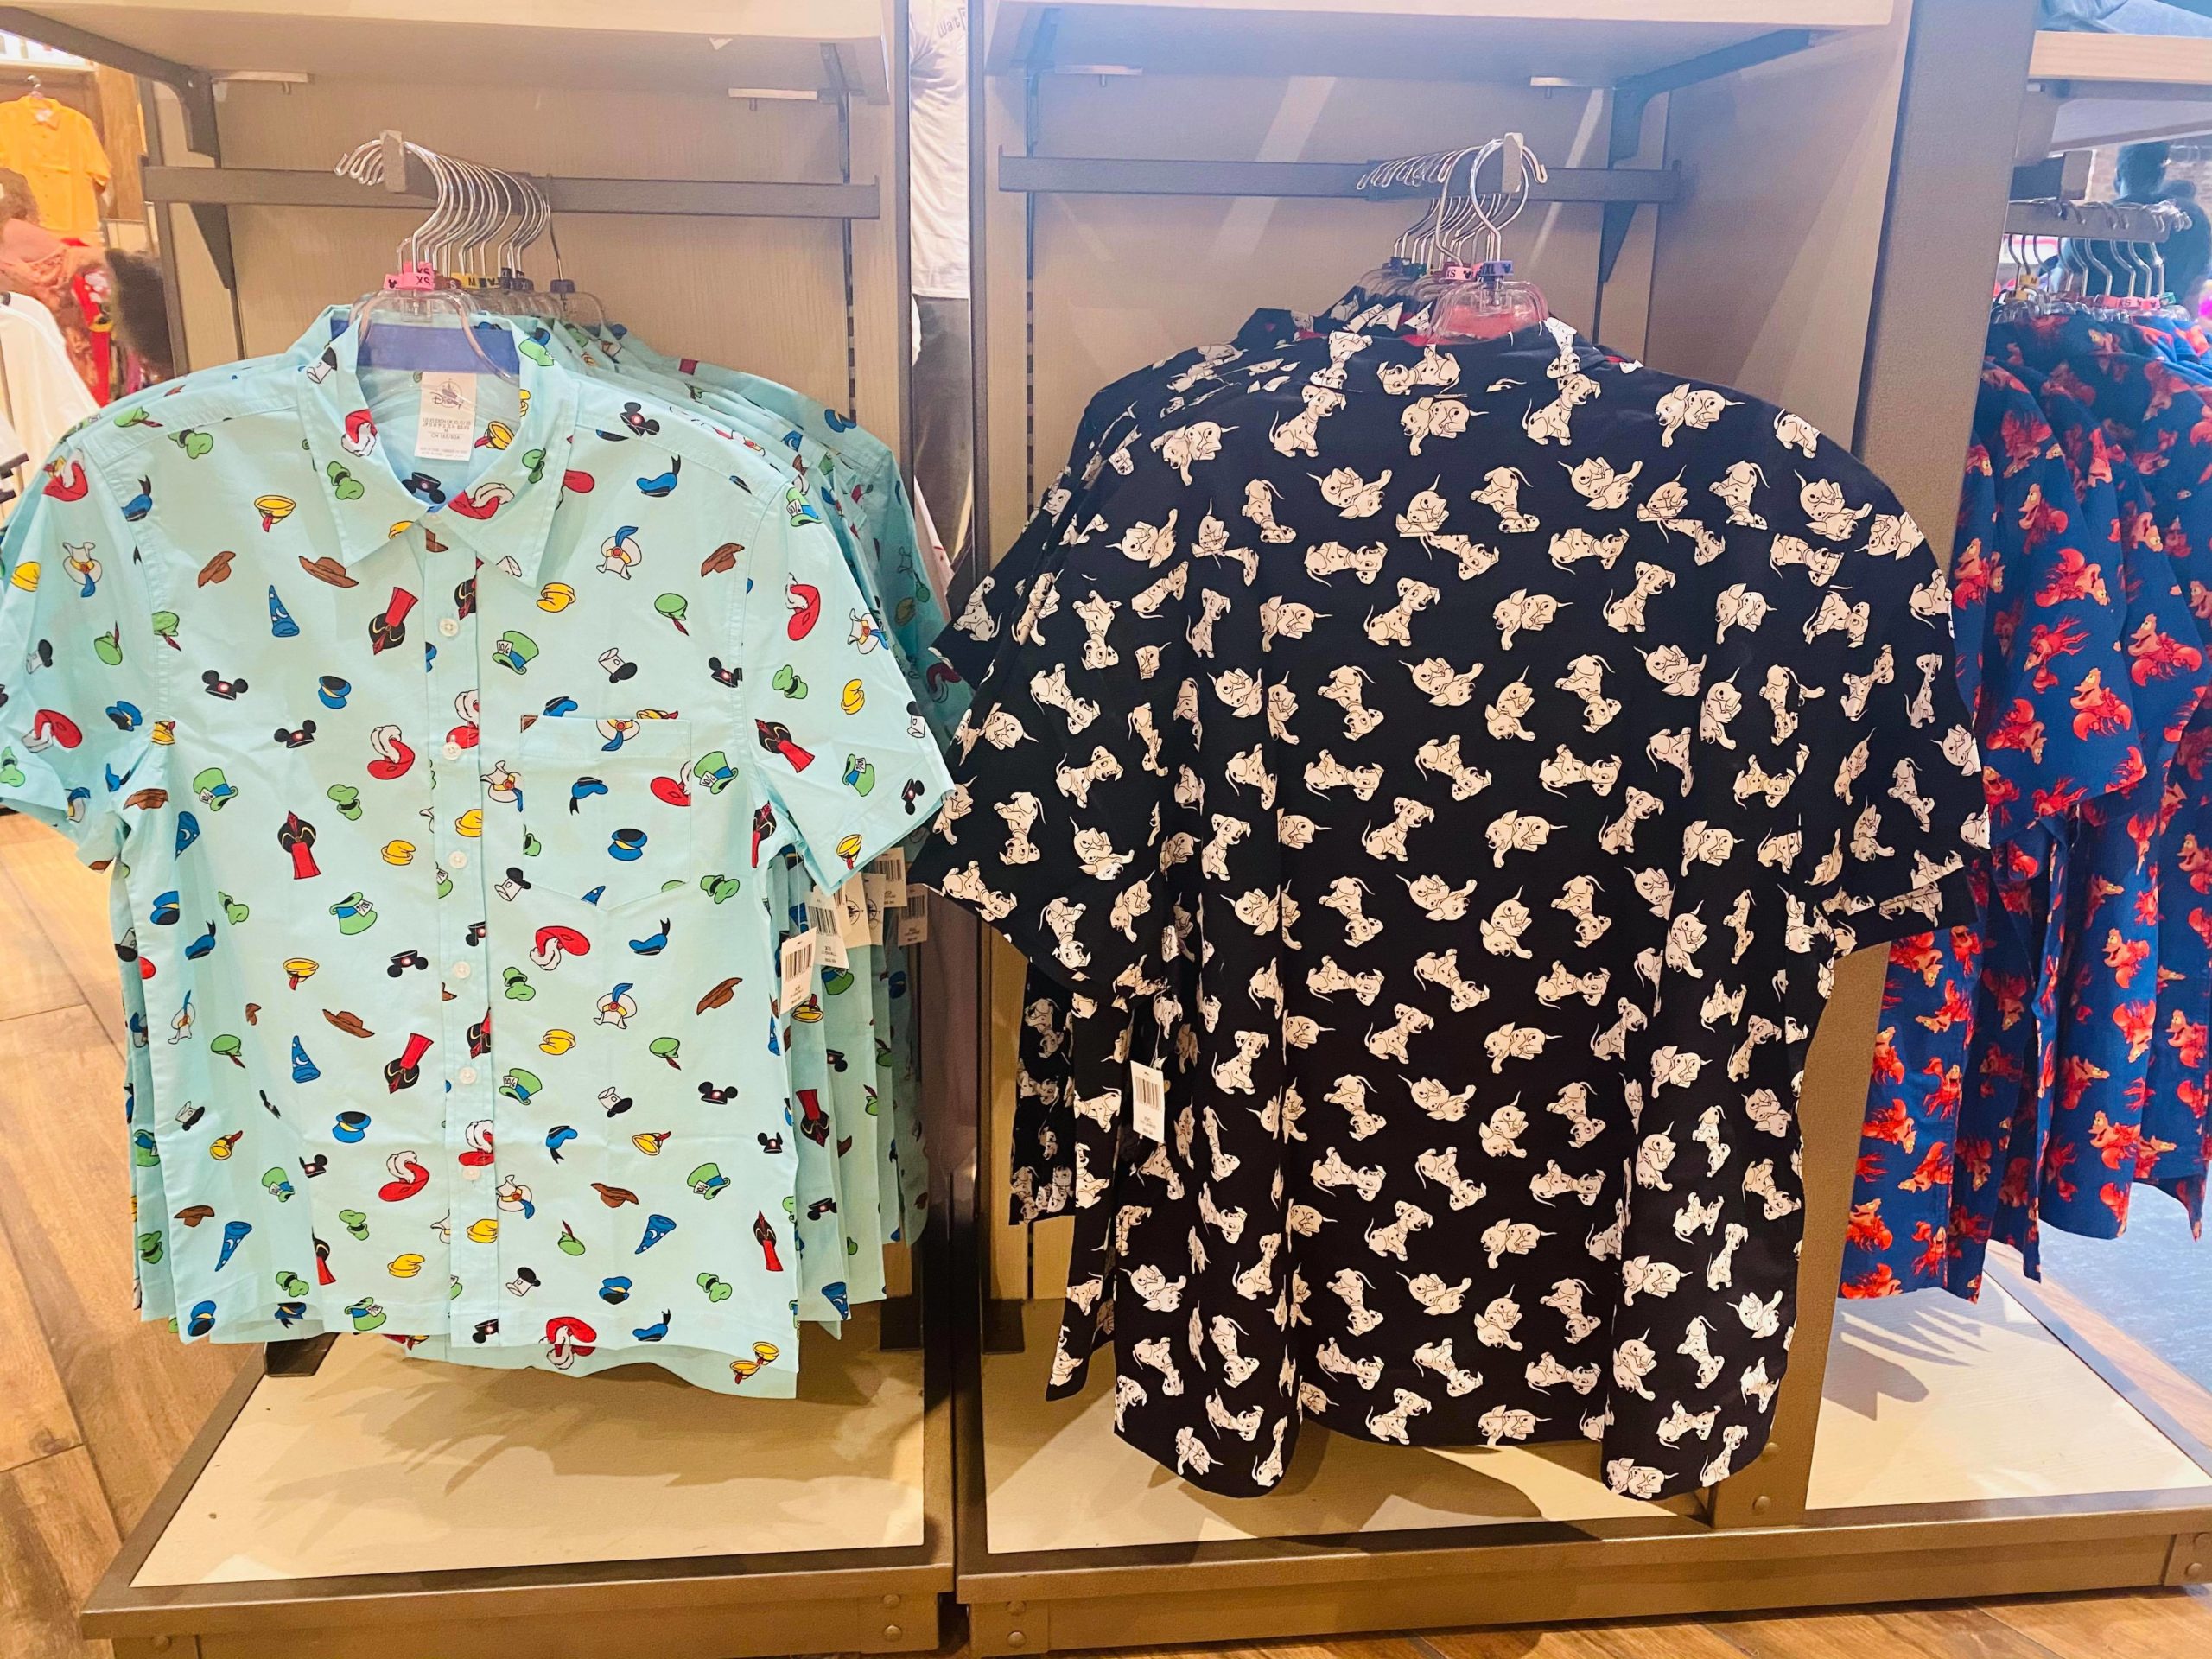 New Men's Button-Up Shirts Arrive at World of Disney - MickeyBlog.com